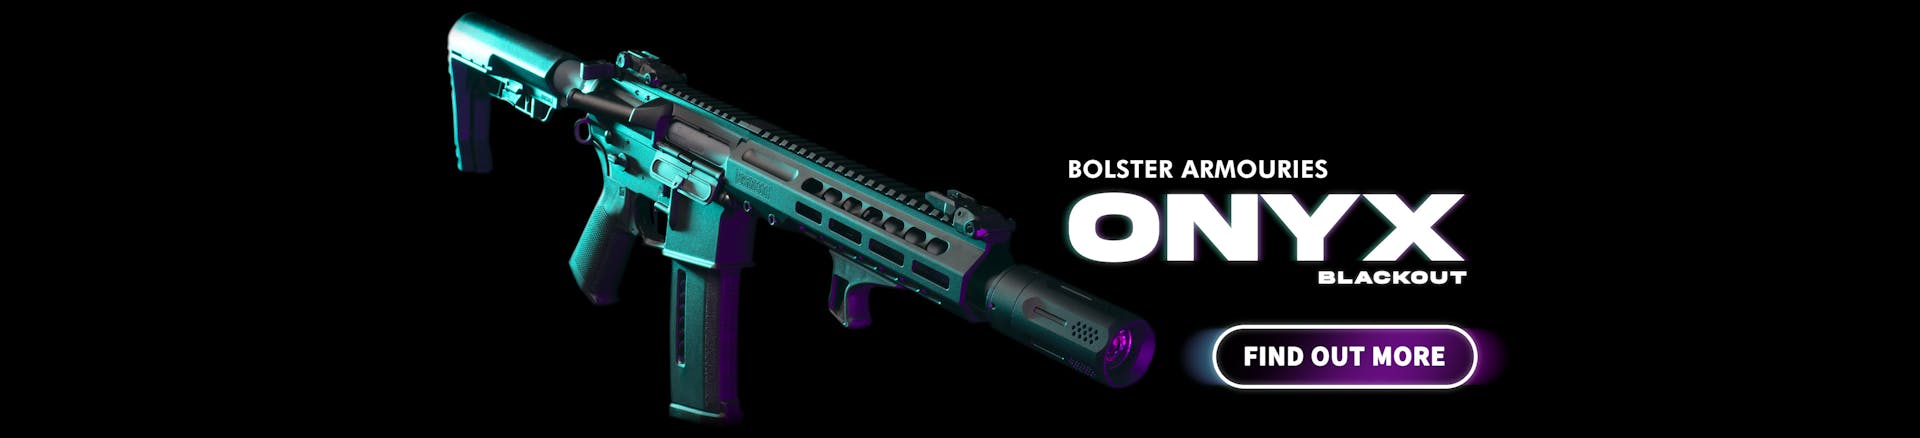 ONYX Blackout | Bolster Armouries